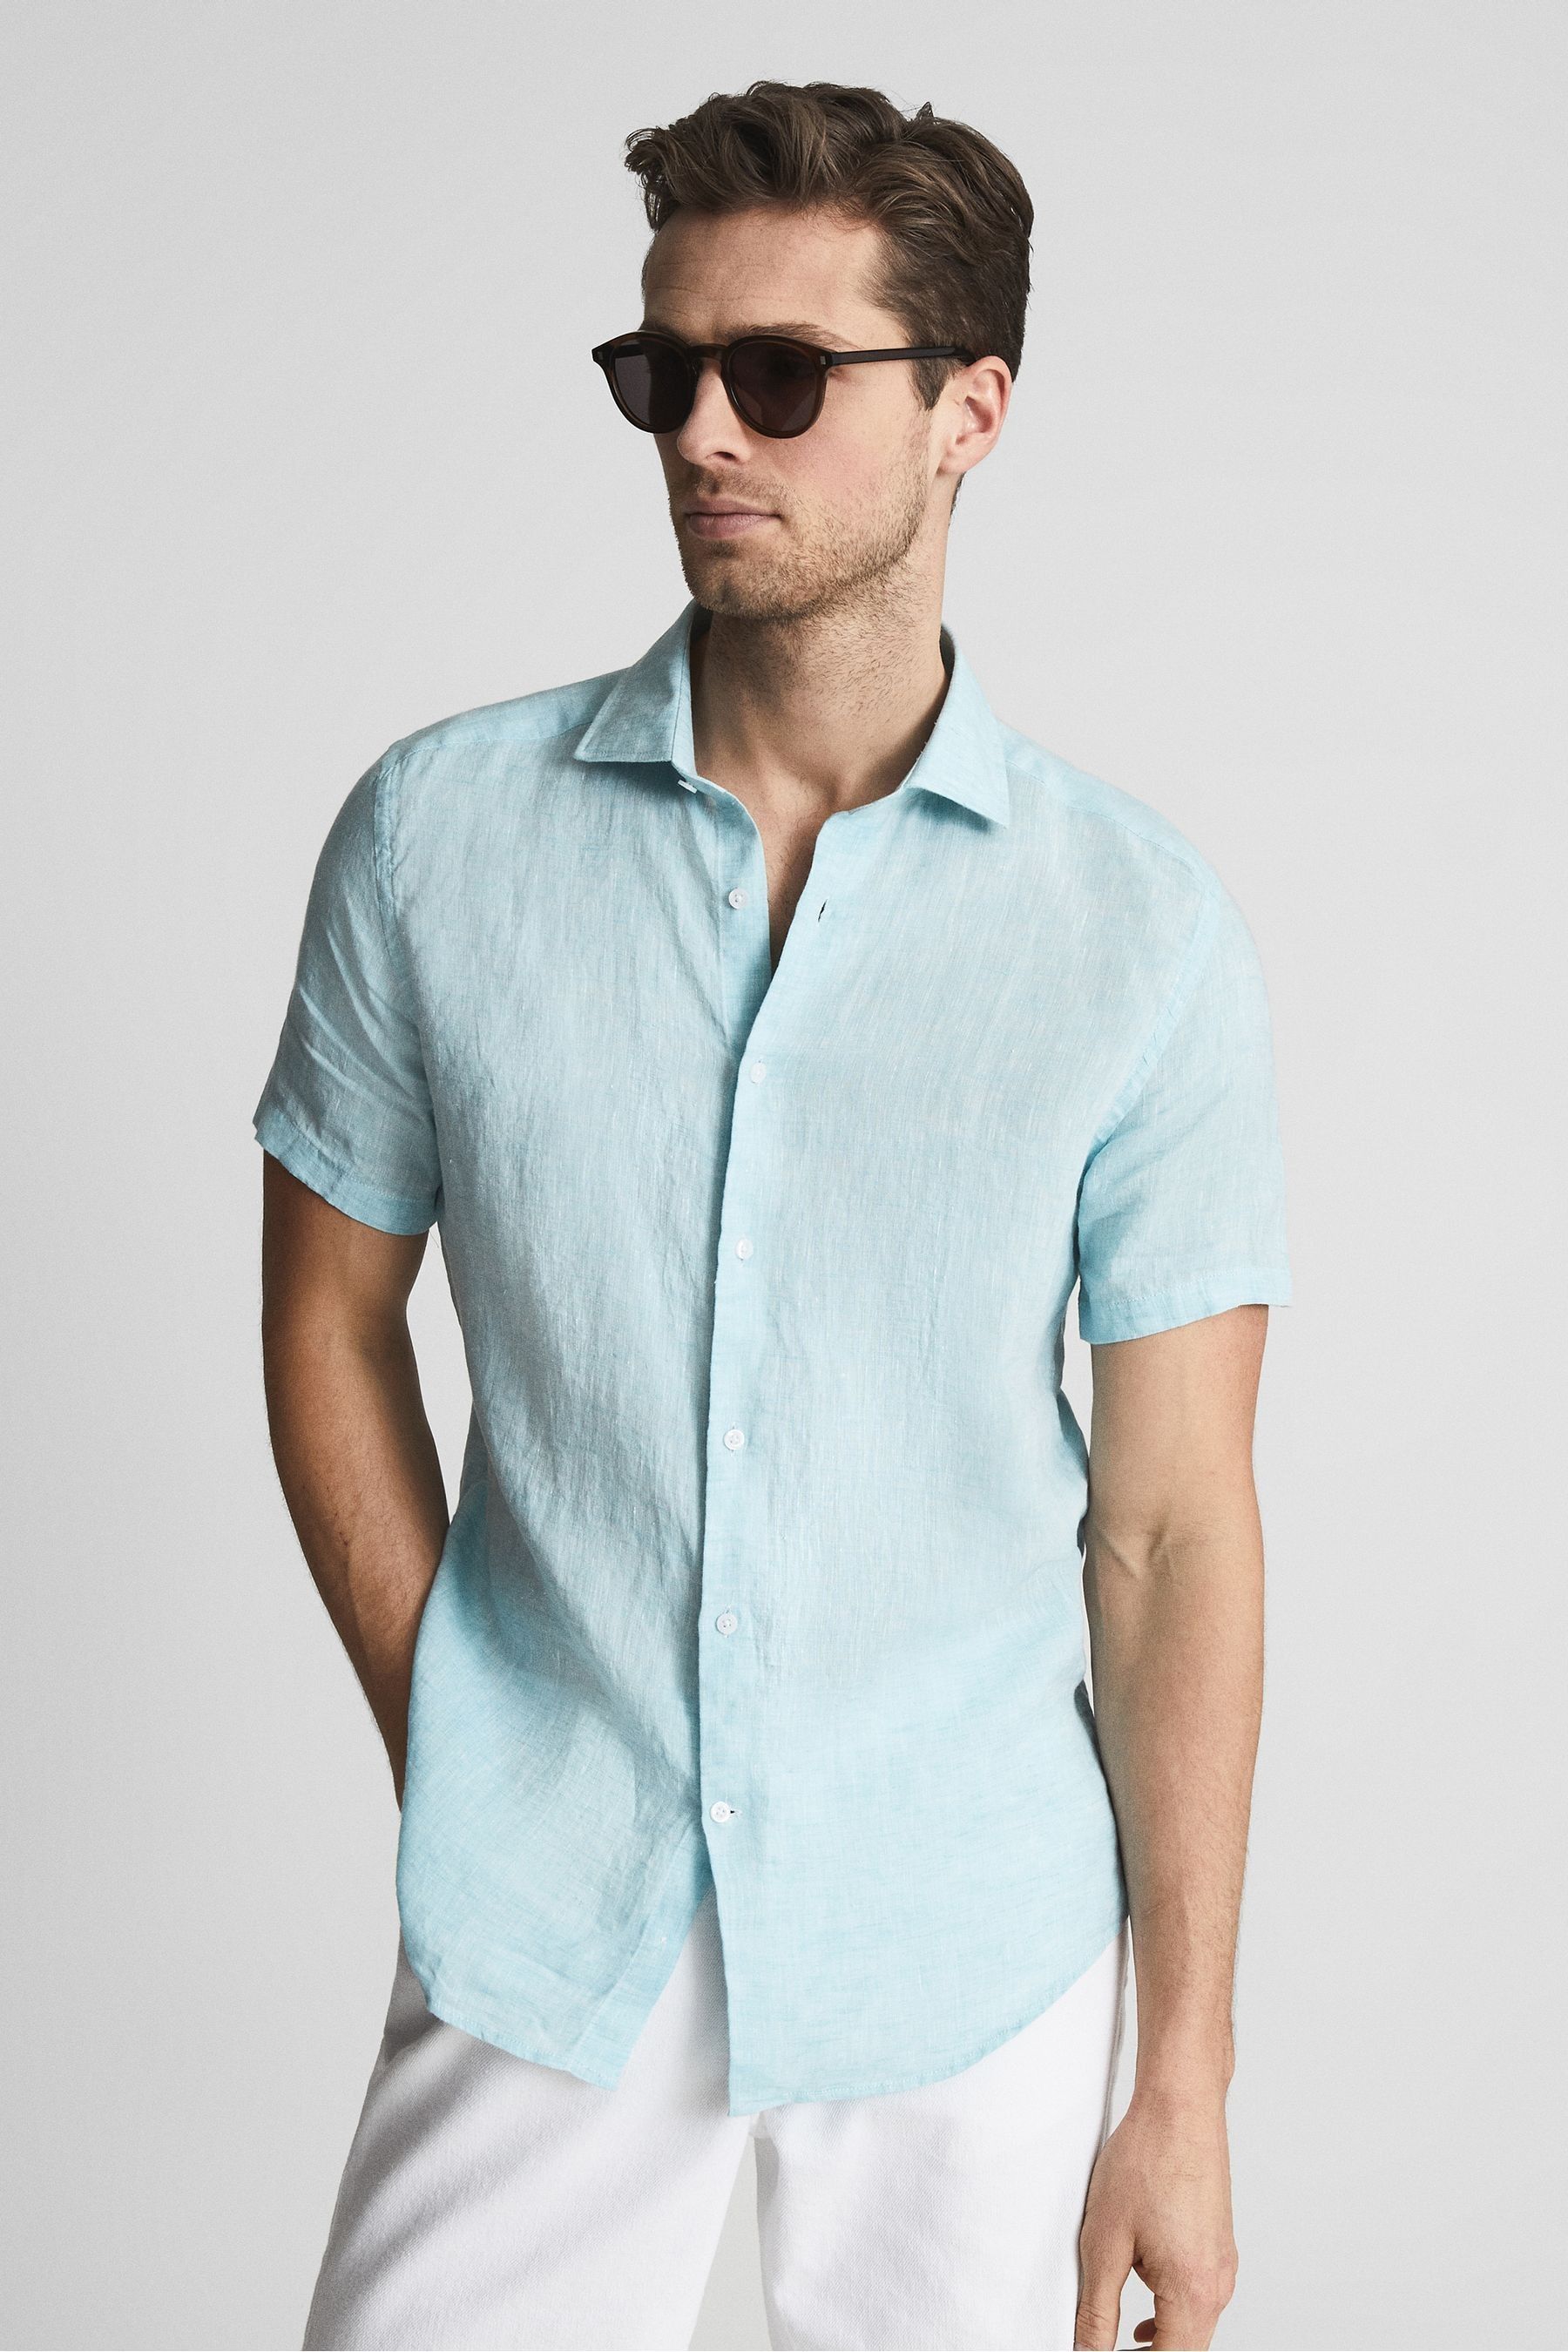 Buy Reiss Holiday Linen Slim Fit Shirt from the Next UK online shop